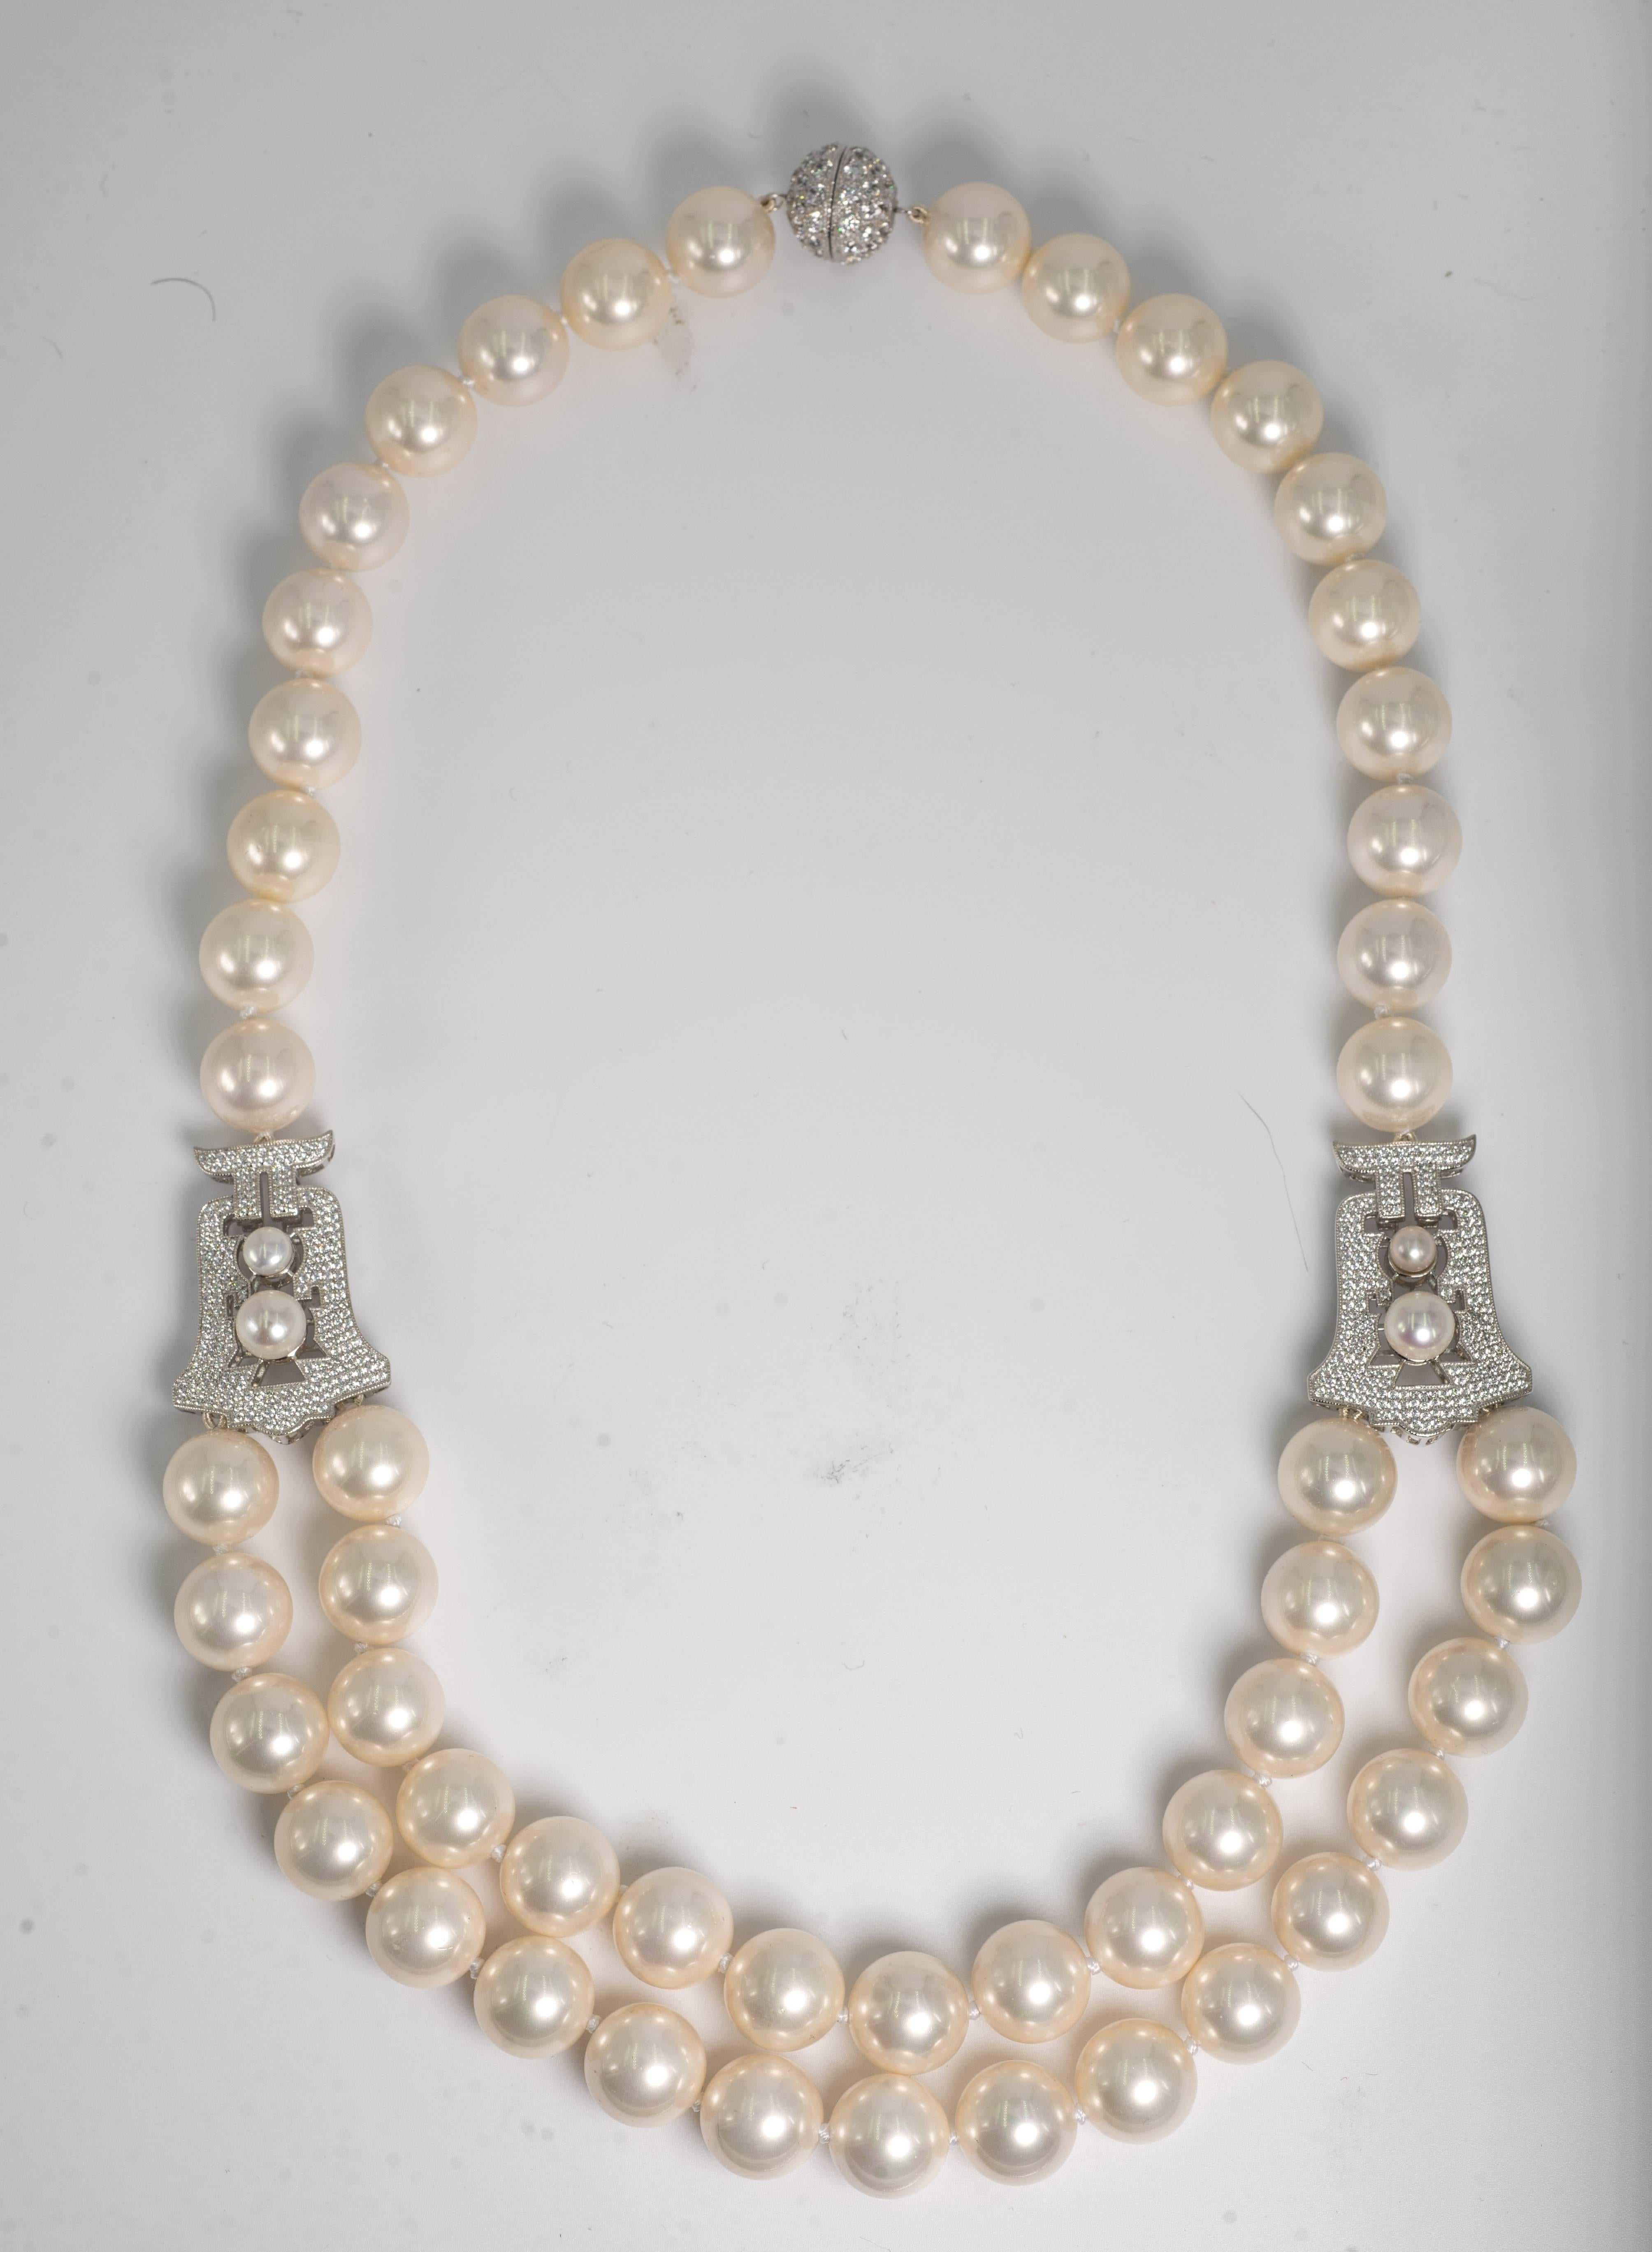 Elegant classic Audrey Hepburn Style one row14 mm pearls  at the back, side pave cubic zirconia sterling motifs suspending two rows of 14mm pearls for the front. The Art Deco style pave motifs  are 1 1/4 inches. Total length 24 inches with a pave